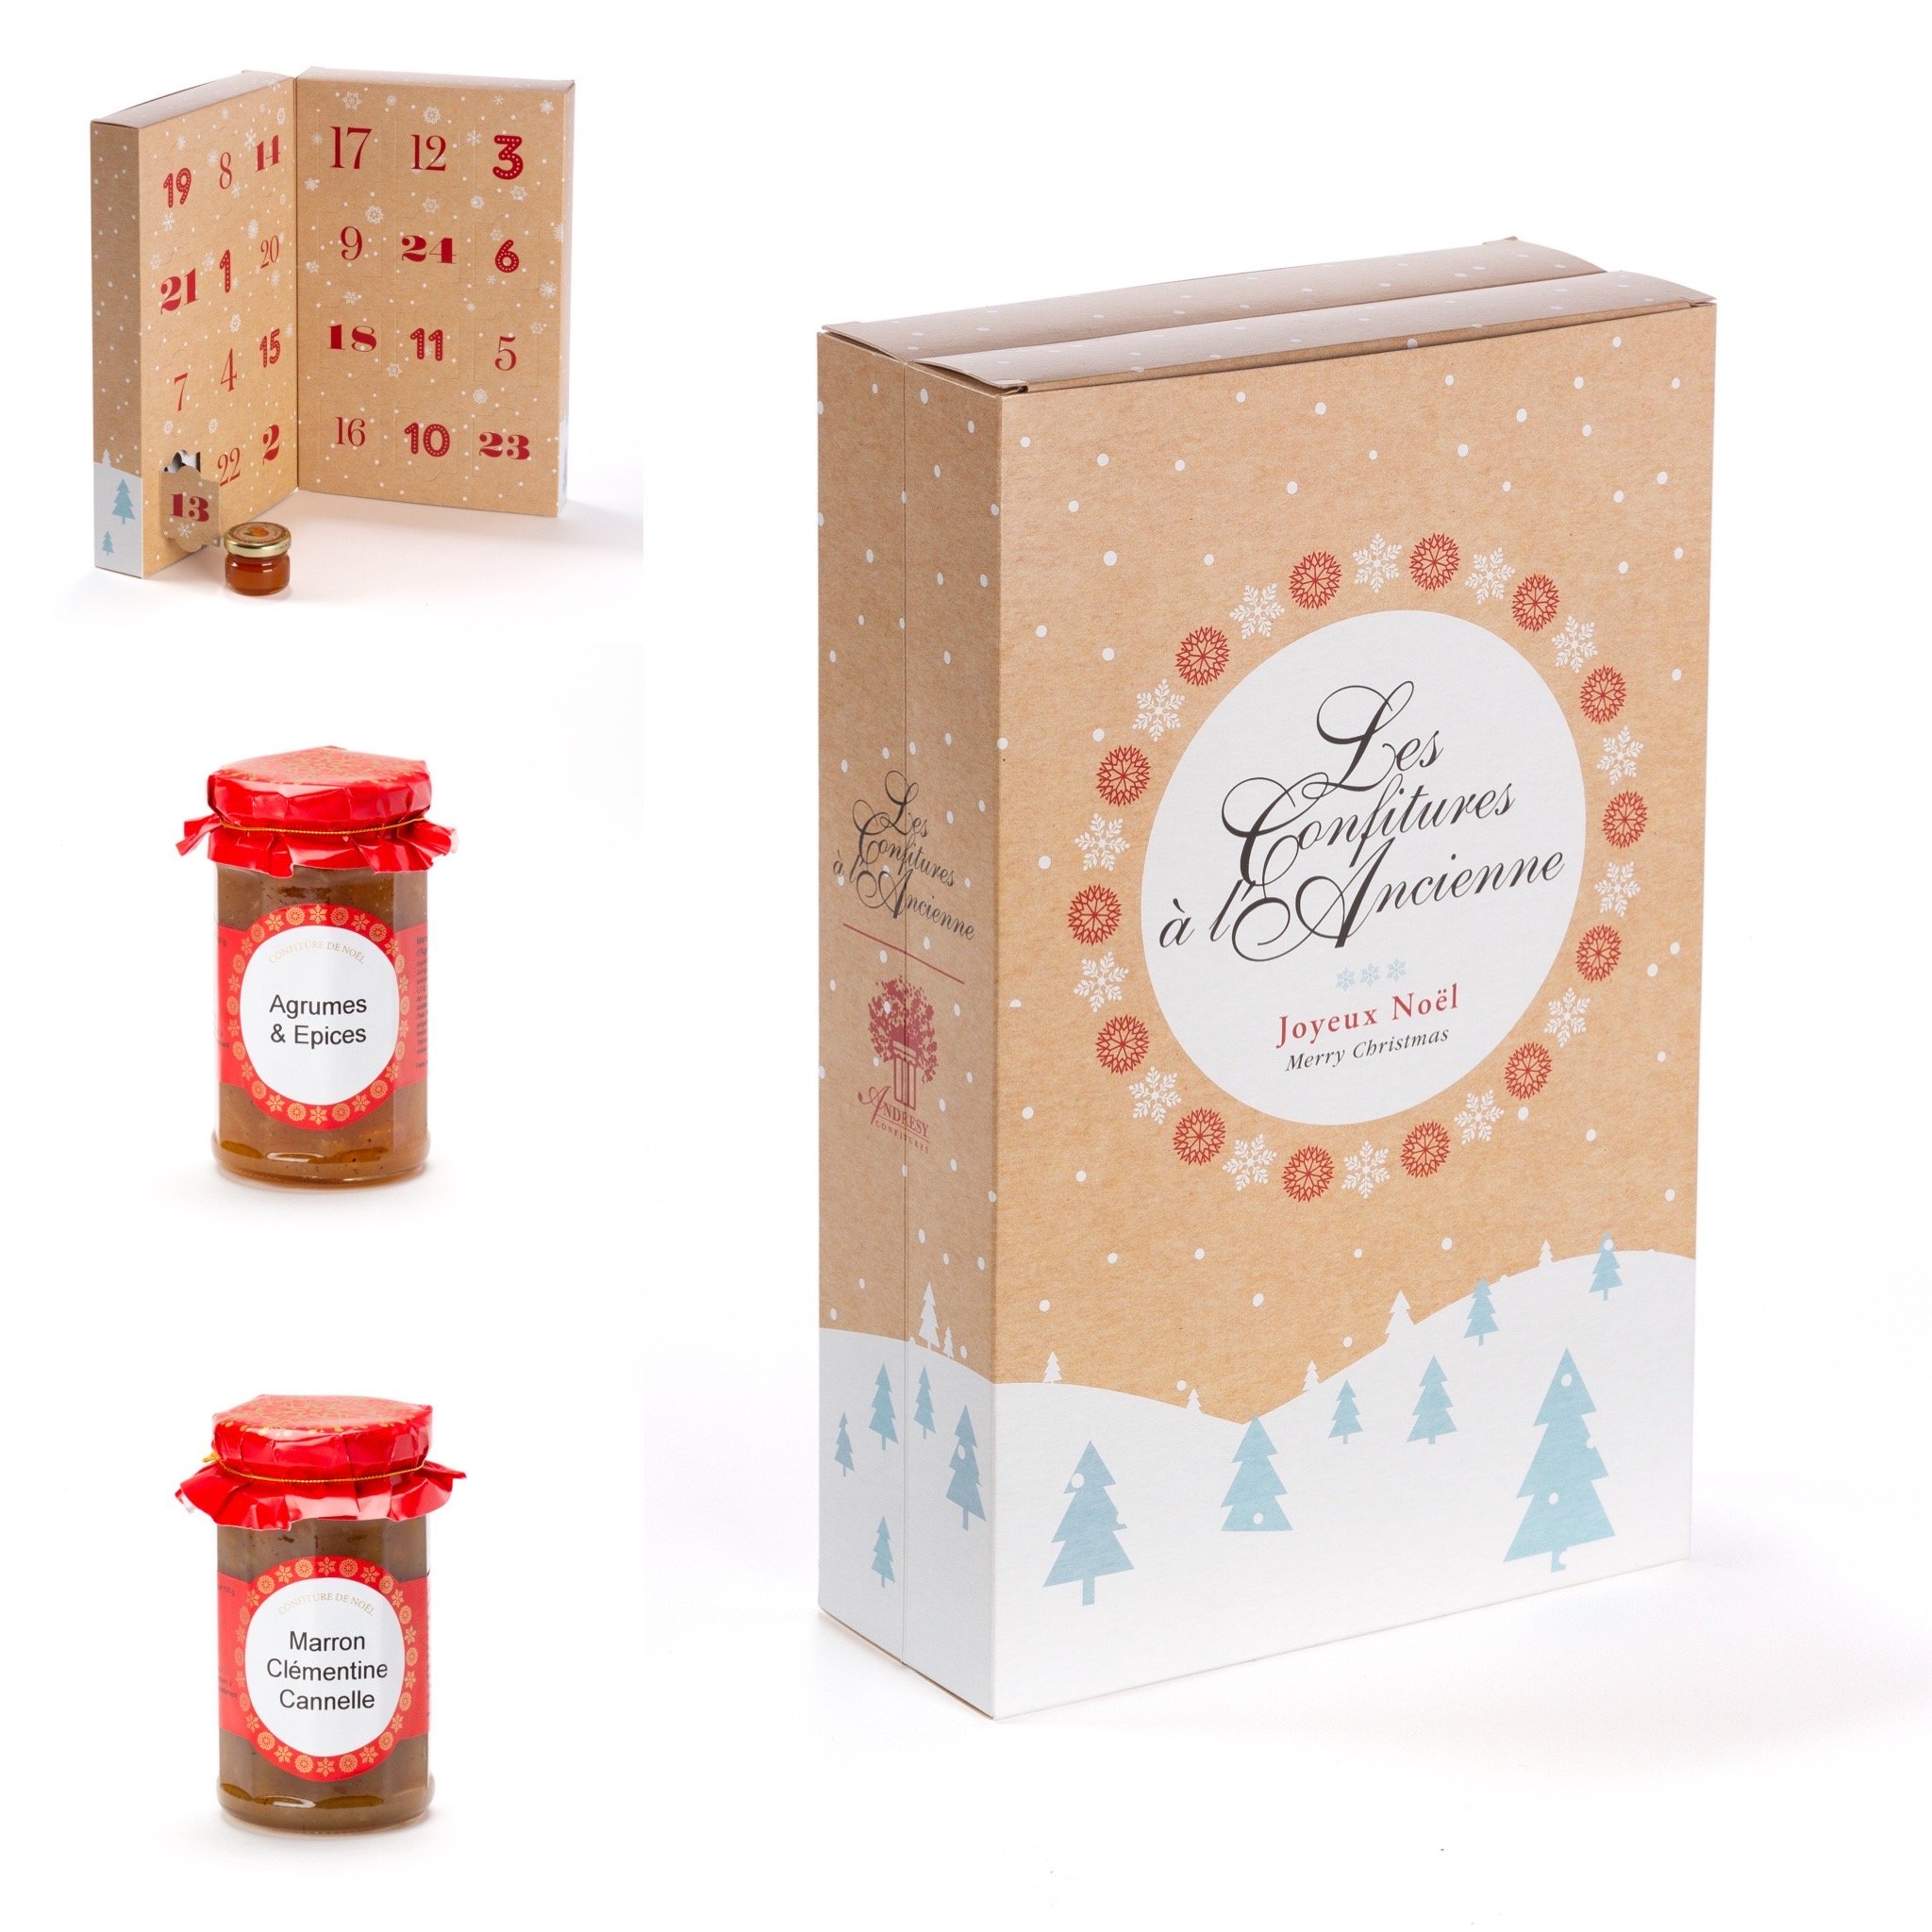 Christmas marmalade and jam avent calendar by Andresy Confitures